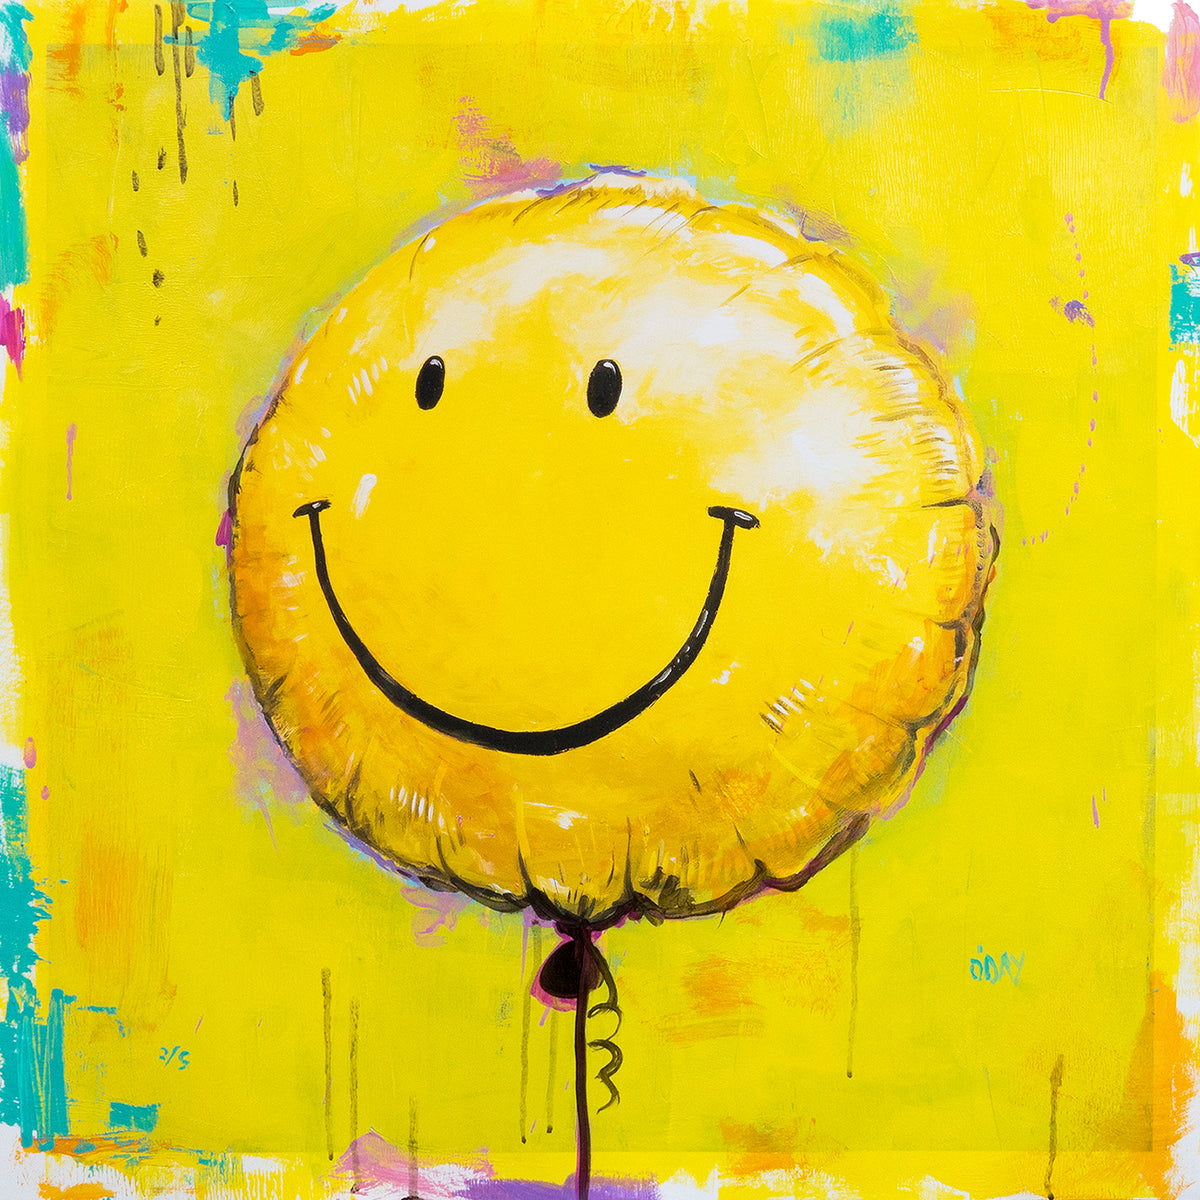 Adam J. O&#39;Day &quot;Smiley Face Balloon: Yellow&quot; - Unique Hand-Painted Print - 24 x 24&quot;